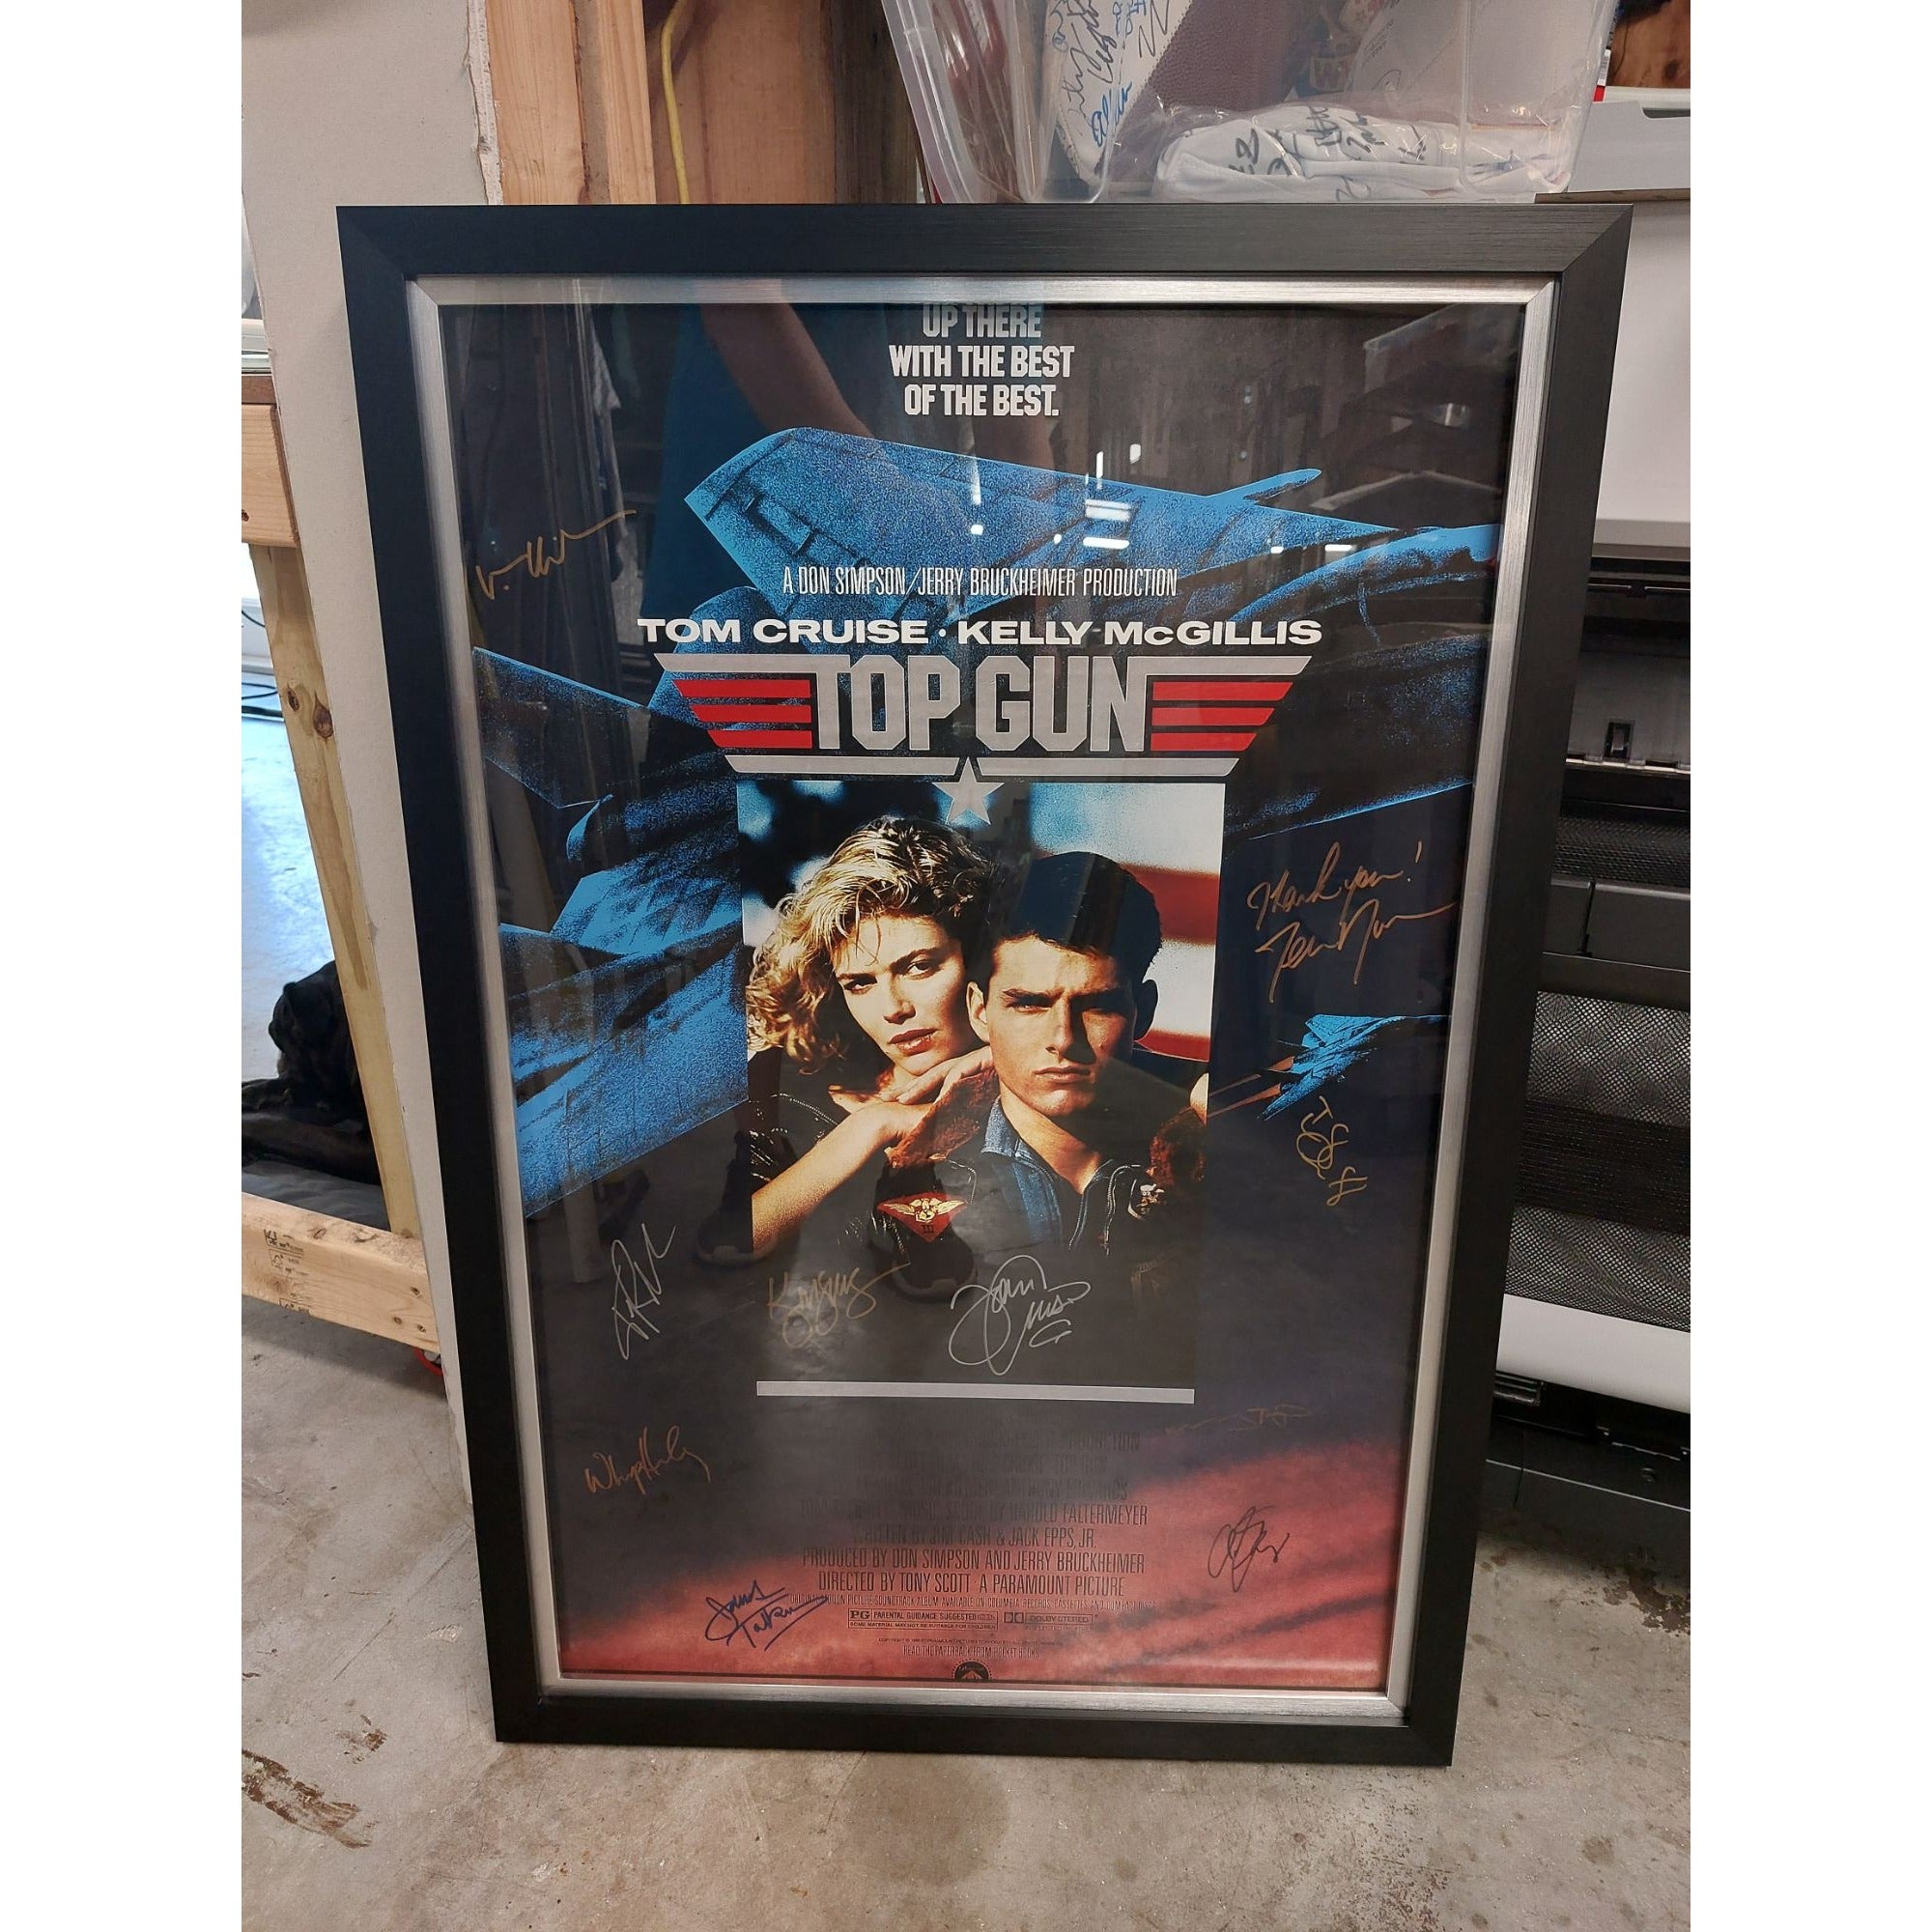 Top Gun Tom Cruise 34x26 original movie poster signed and framed 27x39 with proof